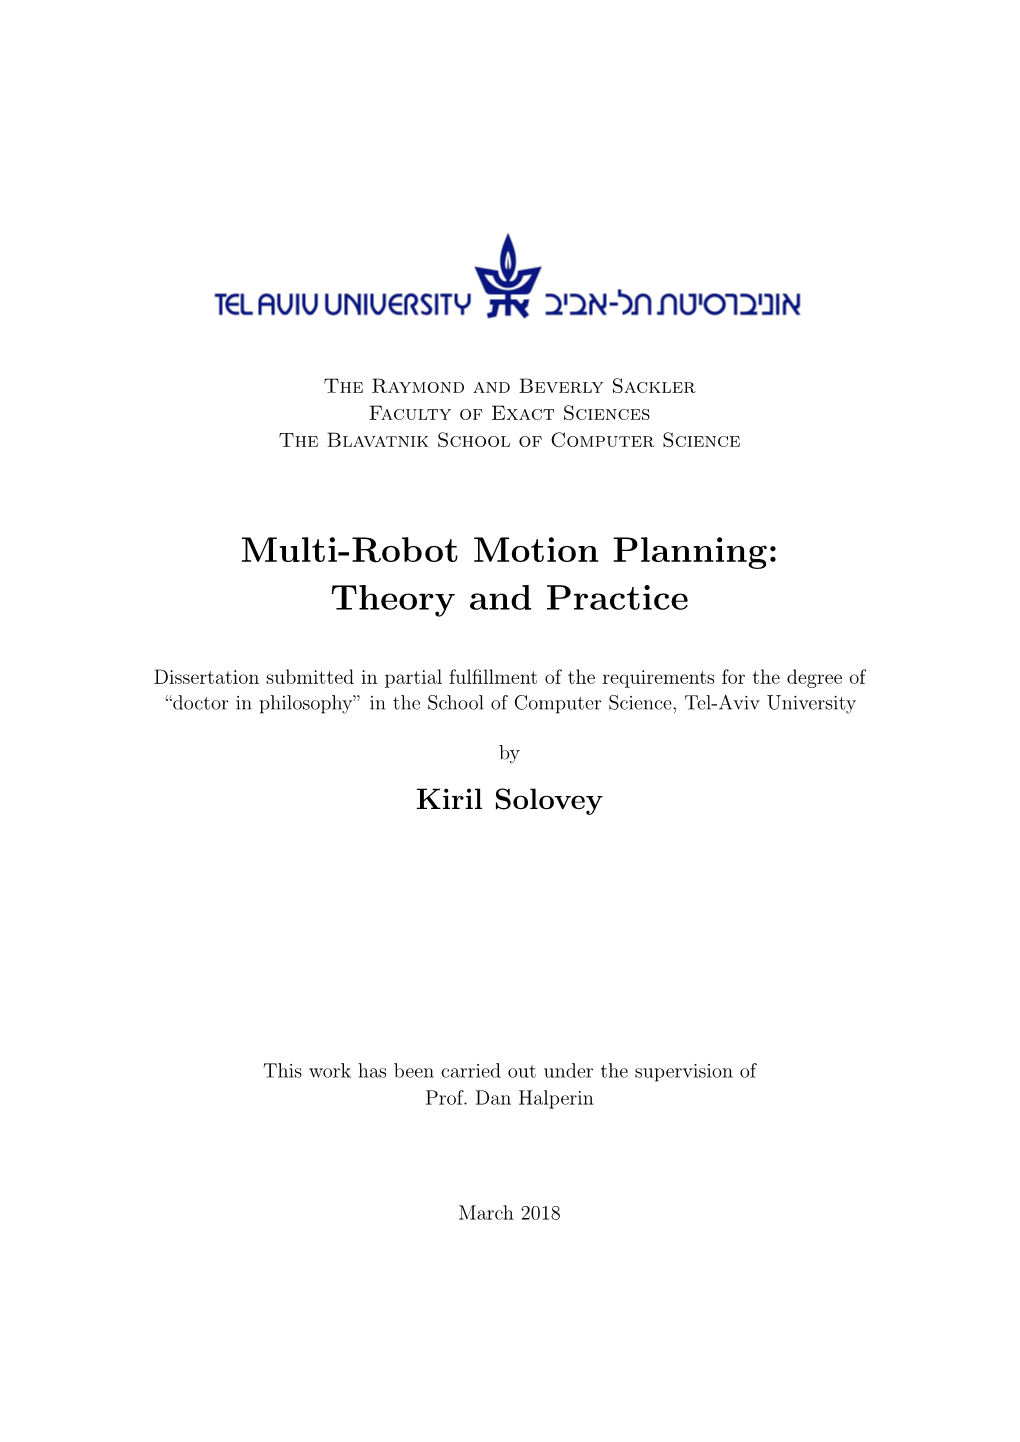 Multi-Robot Motion Planning: Theory and Practice